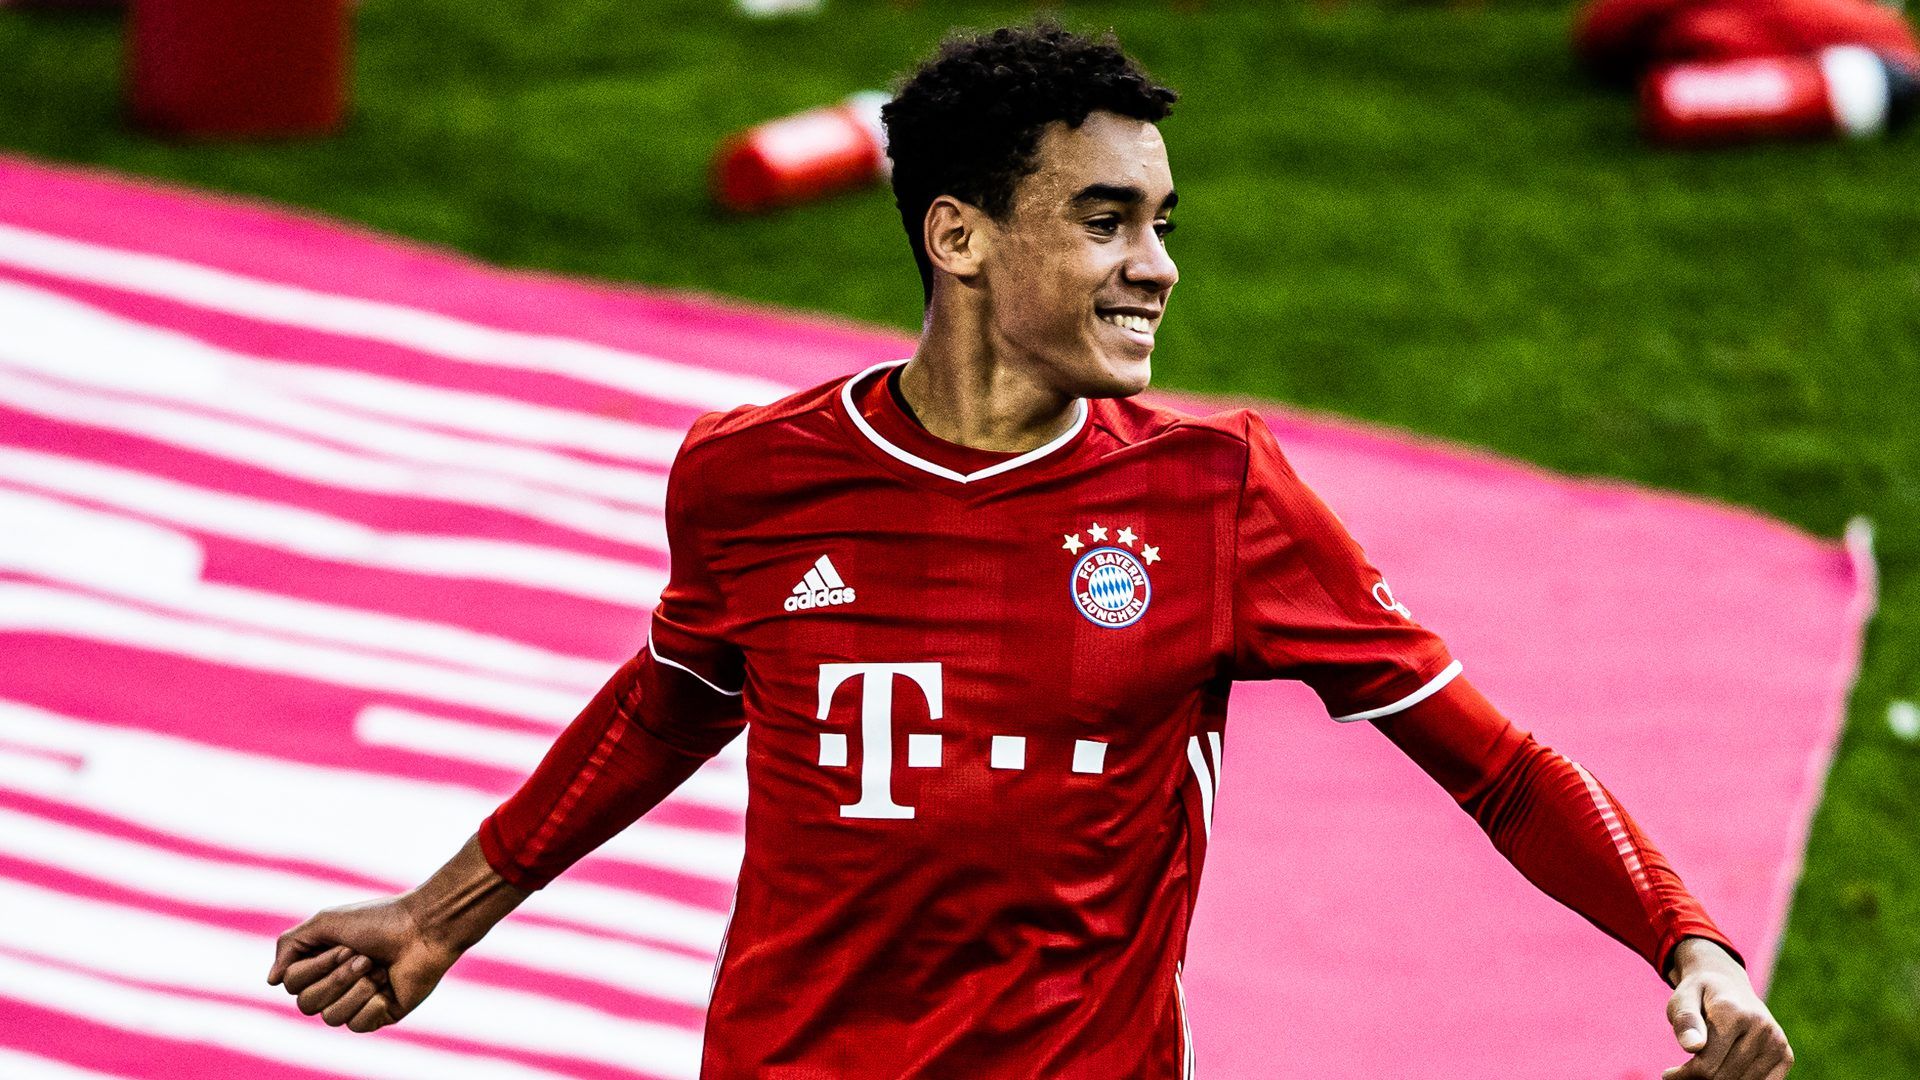 Jamal Musiala: Who is Bayern Munich's Germany star of the future?